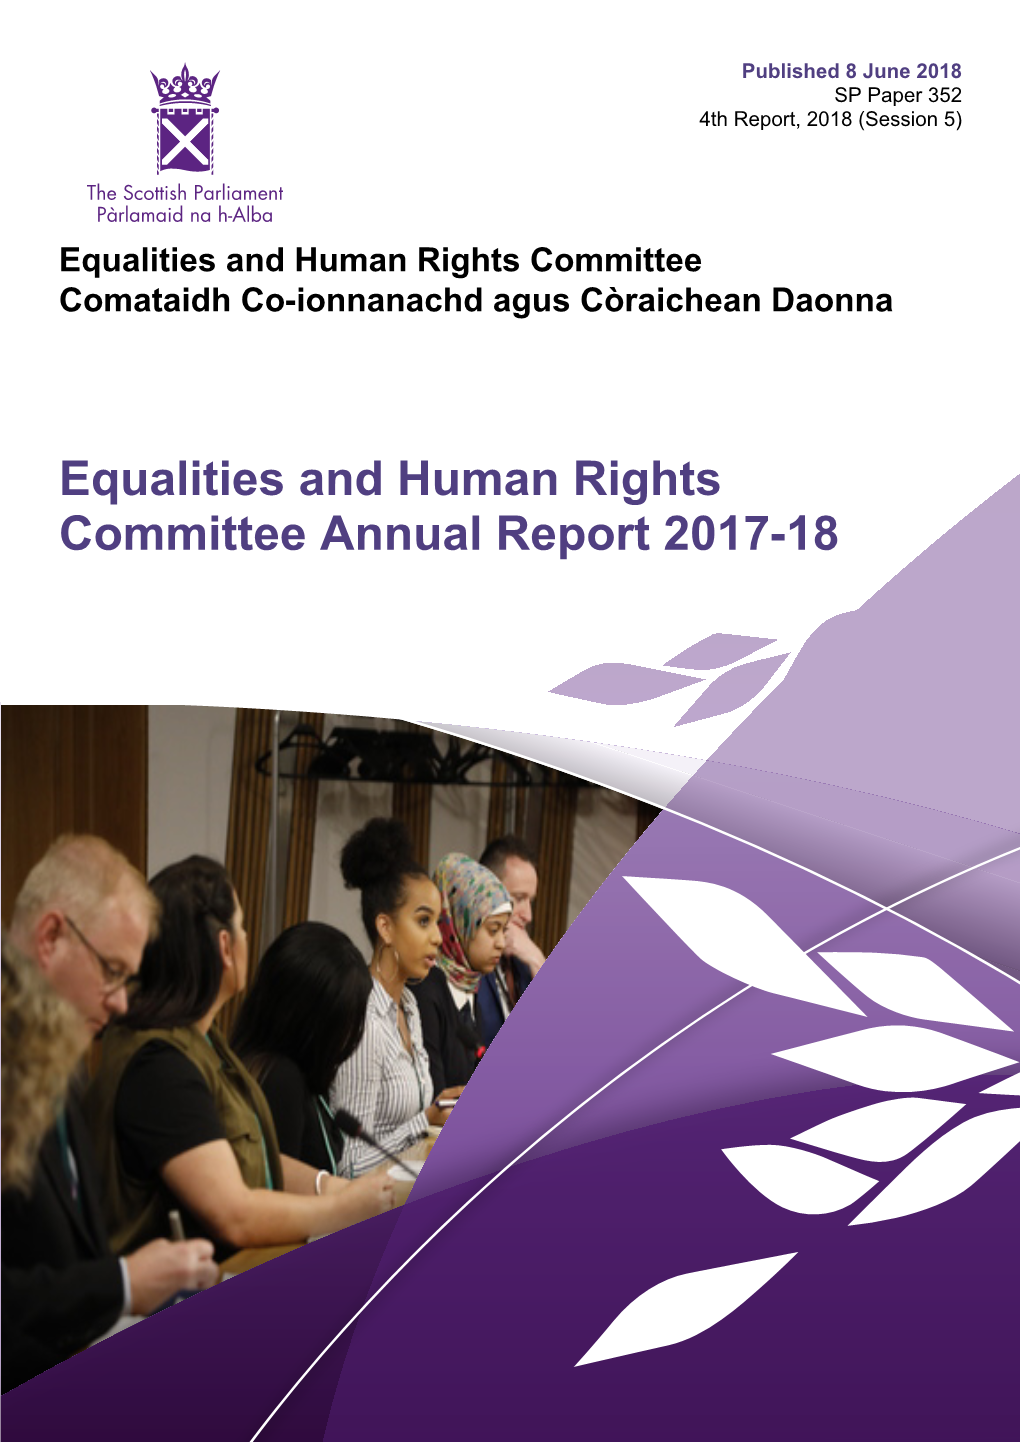 Equalities and Human Rights Committee Annual Report 2017-18 Published in Scotland by the Scottish Parliamentary Corporate Body